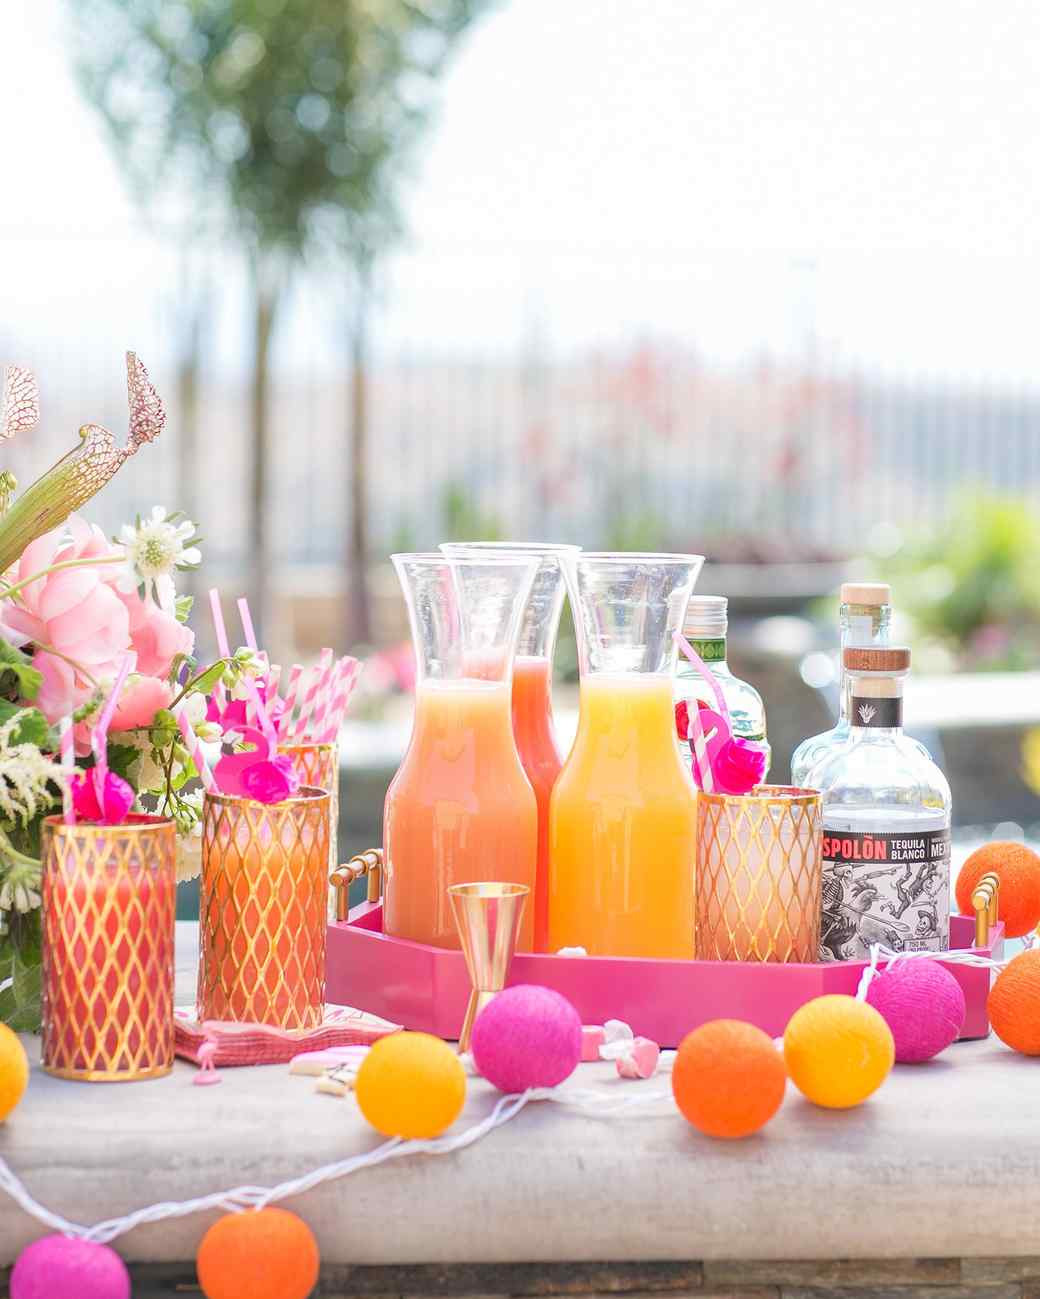 Summer Party Decoration Ideas
 Summer Party Ideas and Decorations